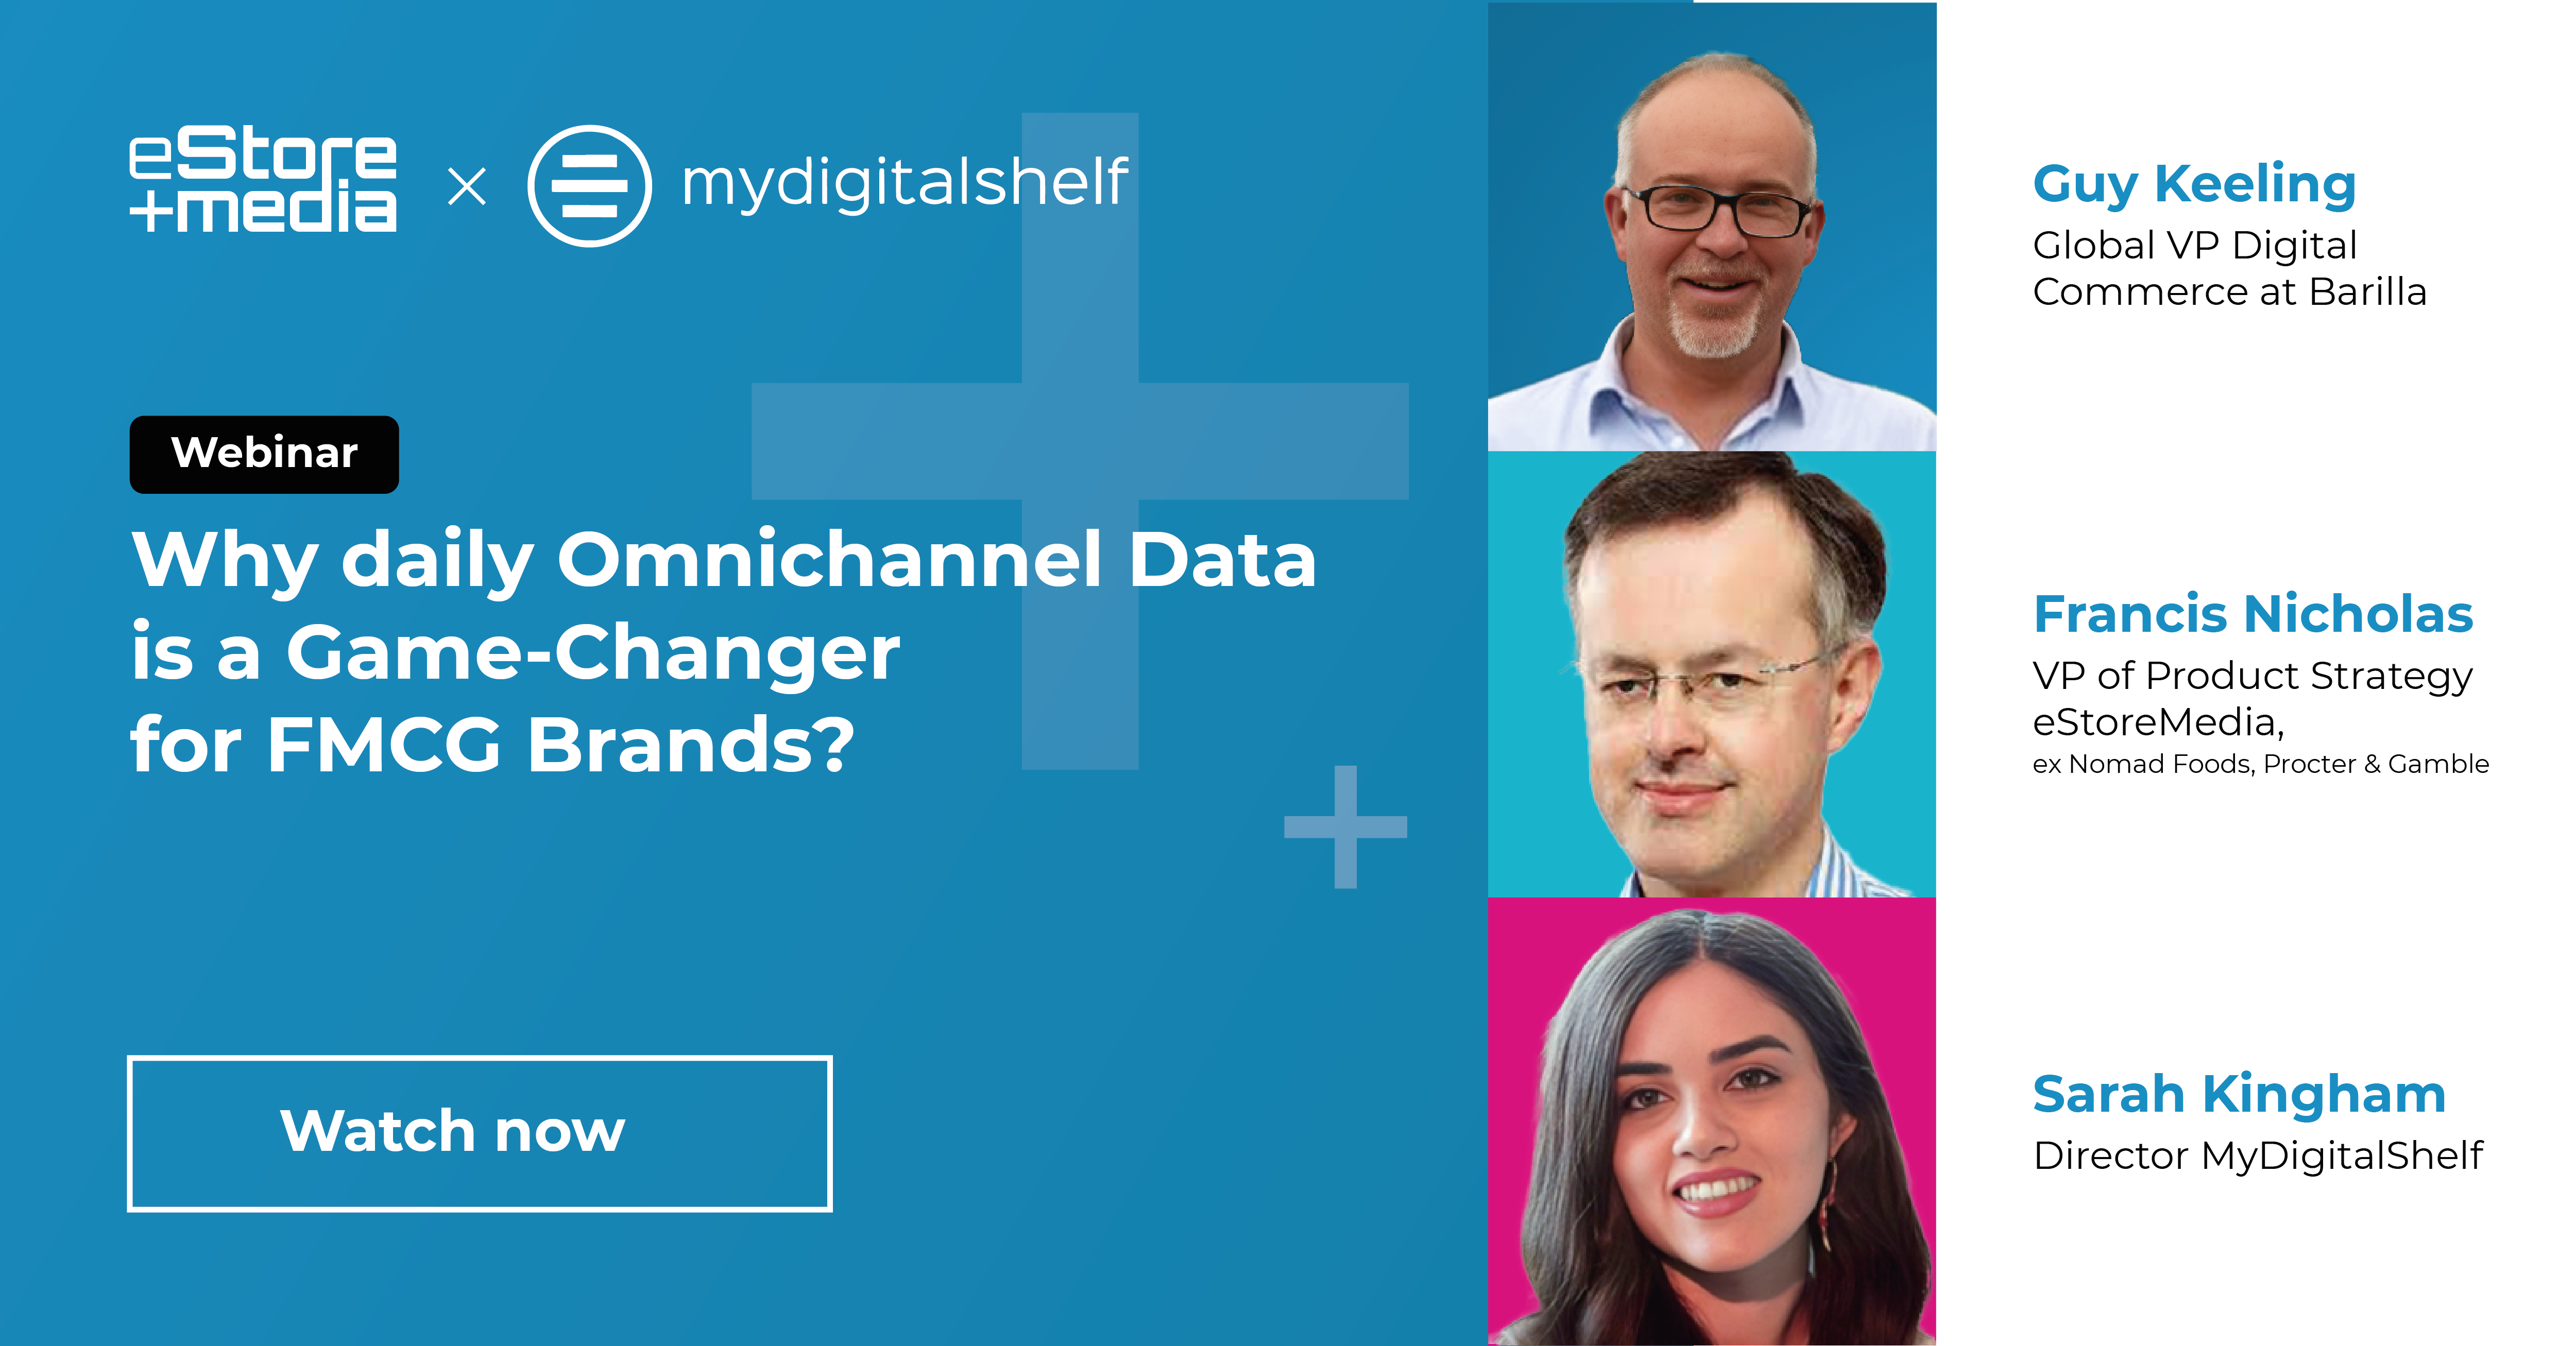 Why daily Omnichannel Data is a Game-Changer for FMCG Brands